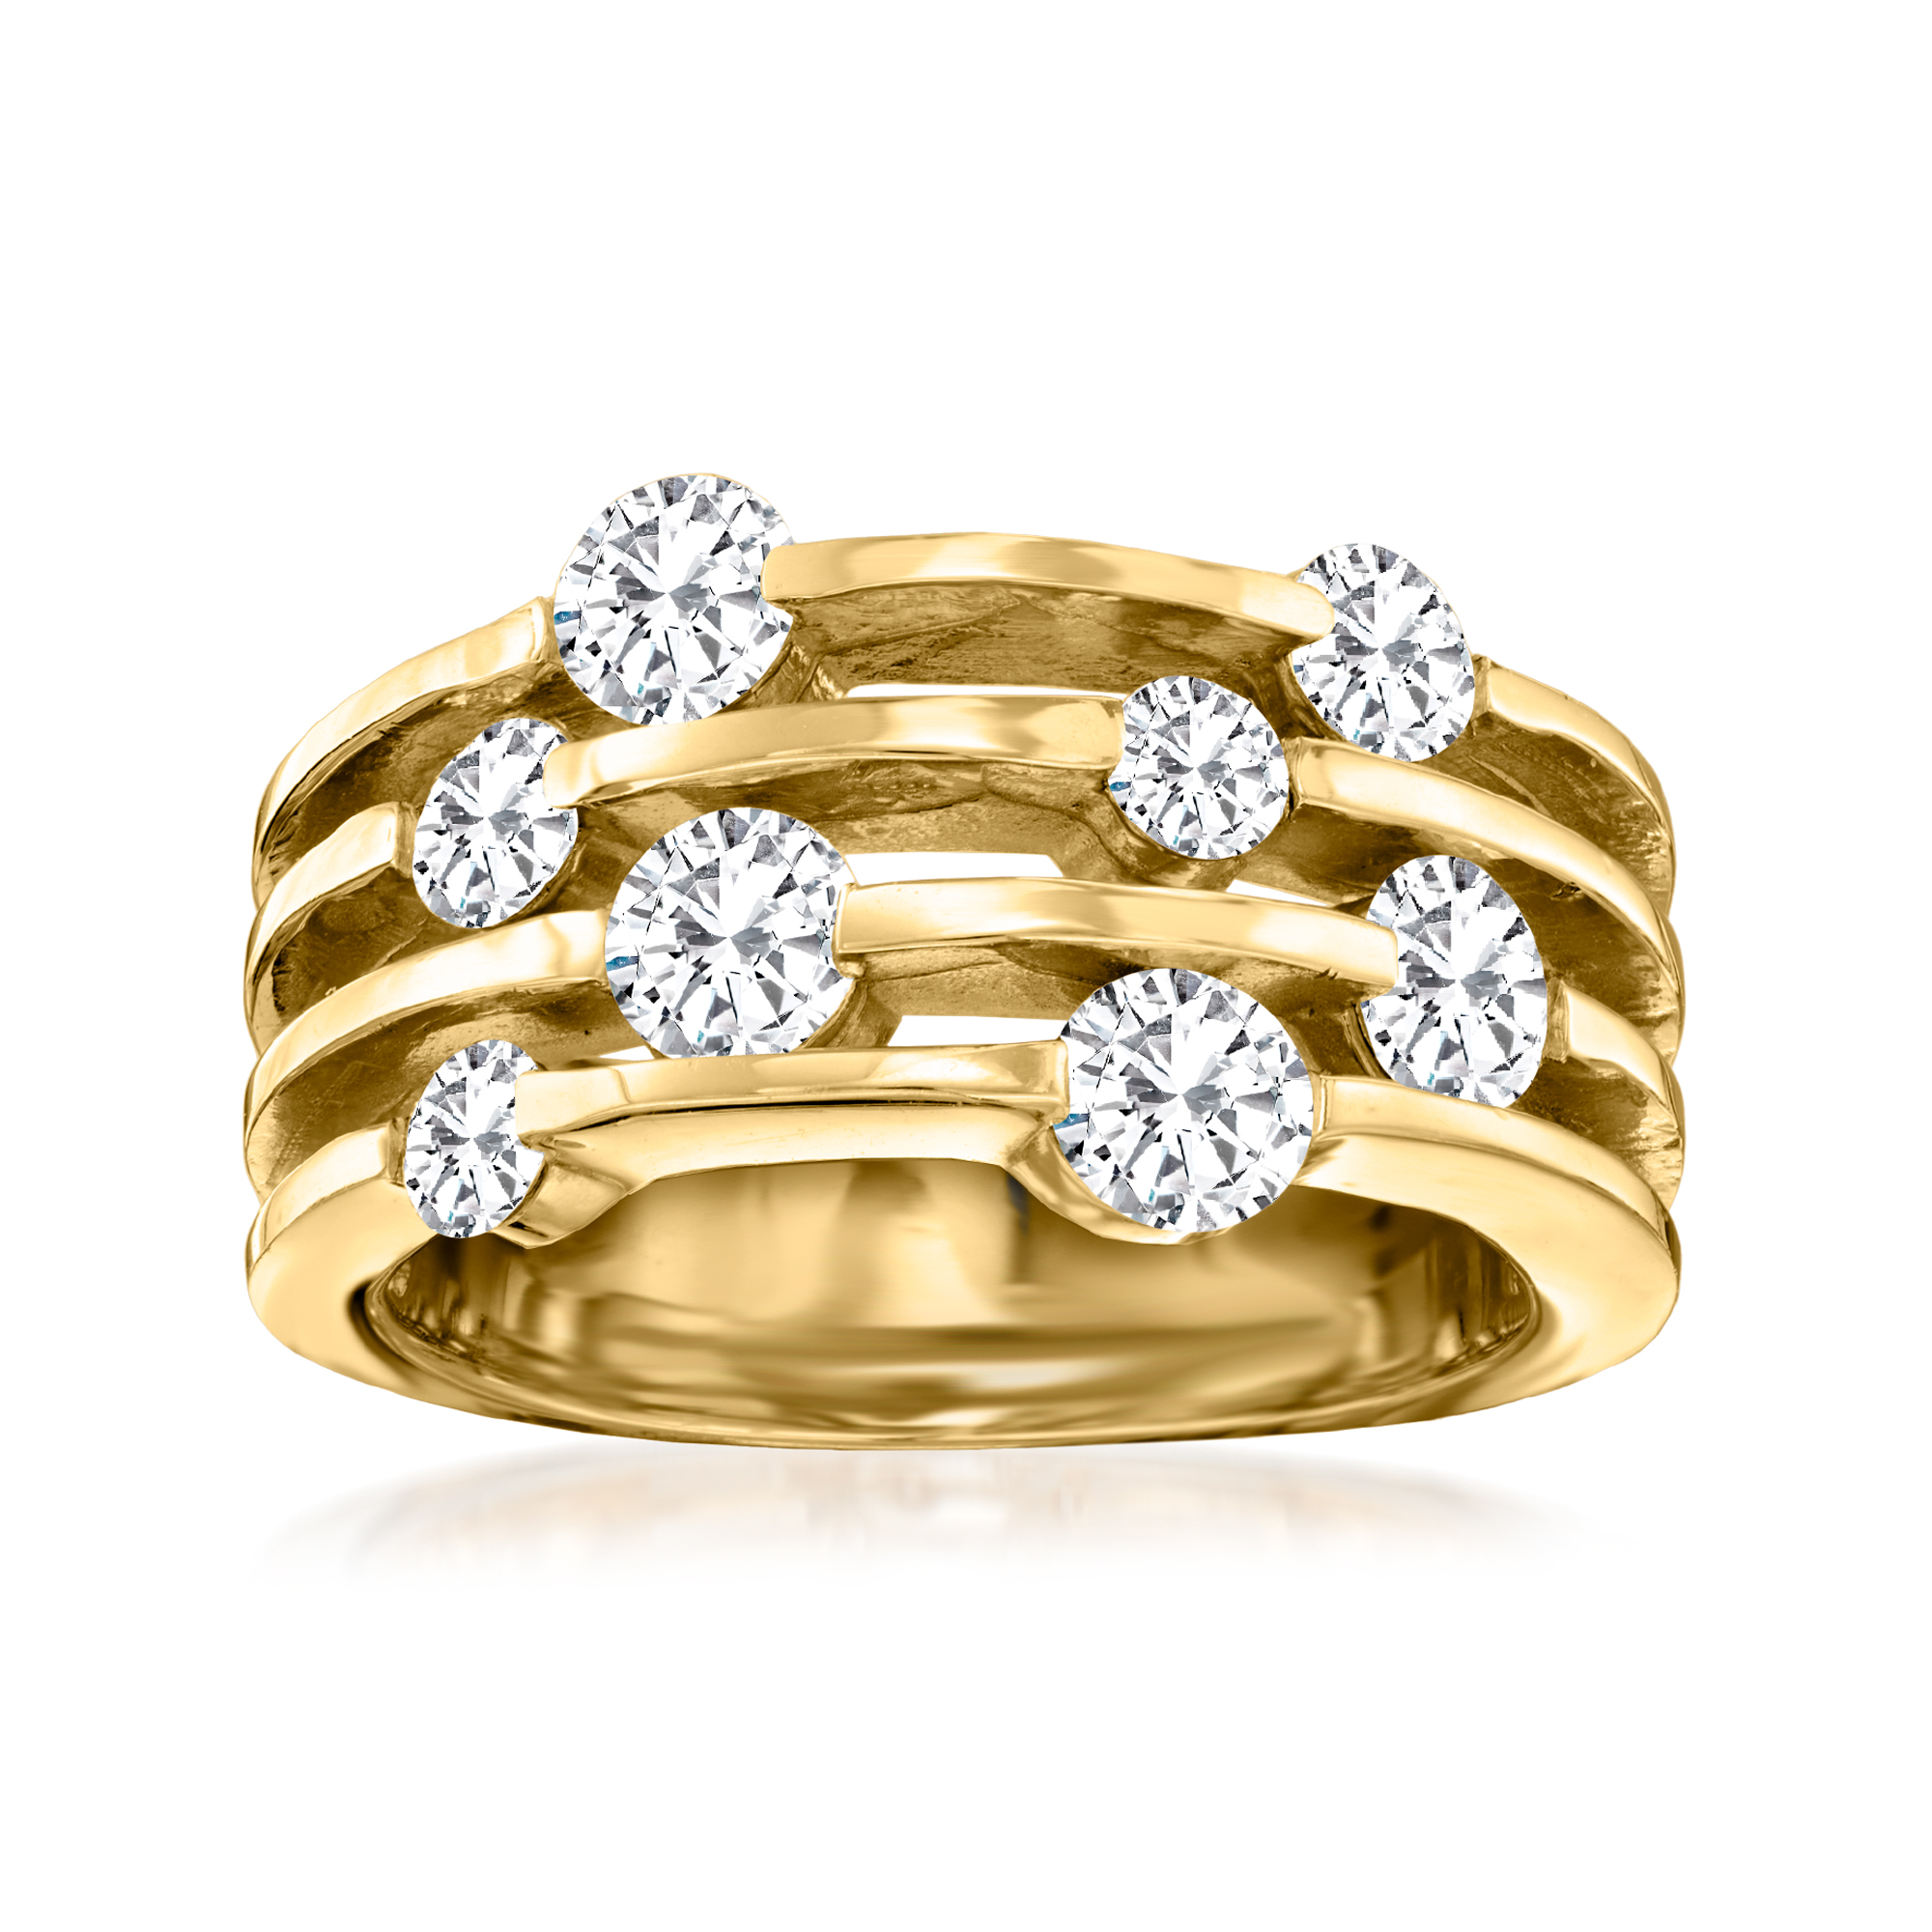 1.50 ct. t.w. Diamond Scattered Multi-Row Ring in 14kt Yellow Gold 